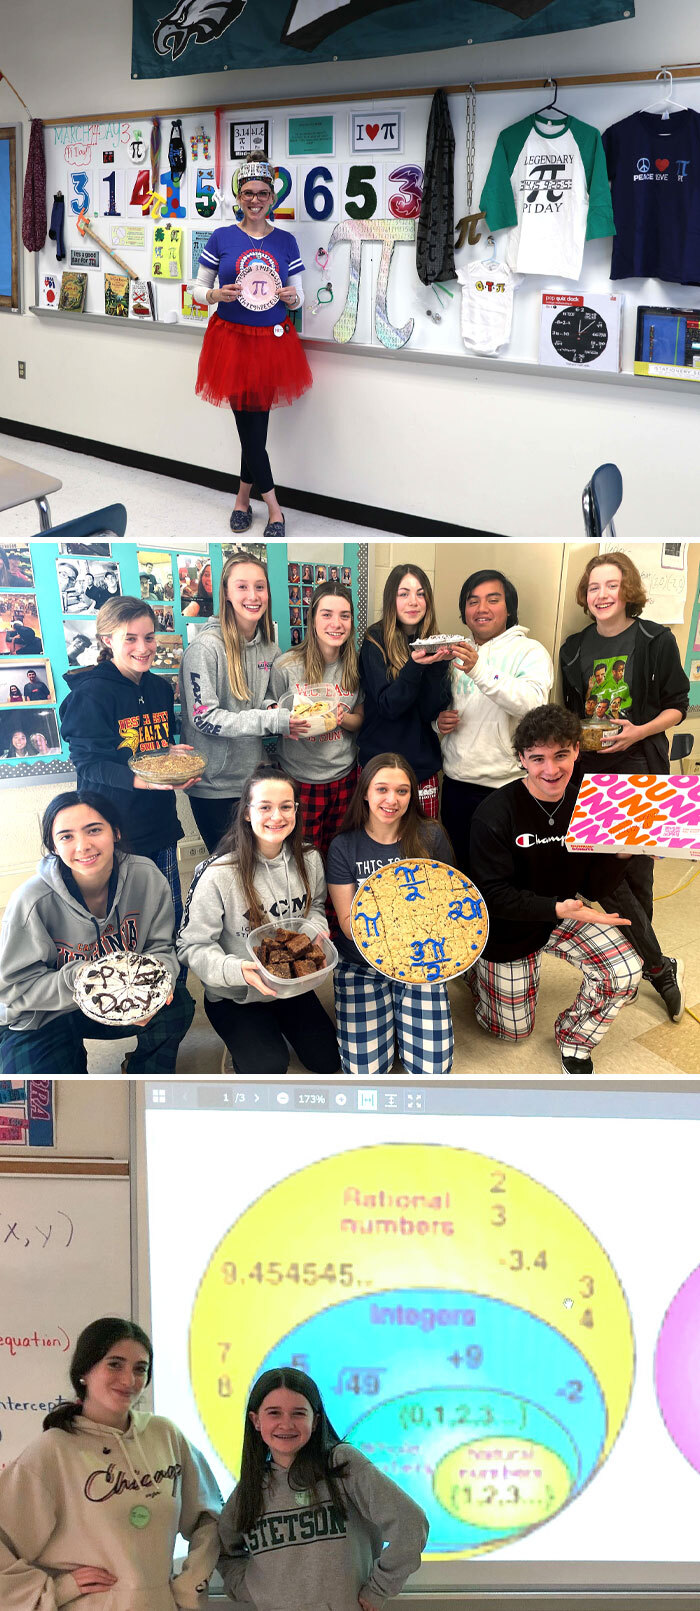 Students Participated In Math Activities And Brought In Pi-Themed Treats